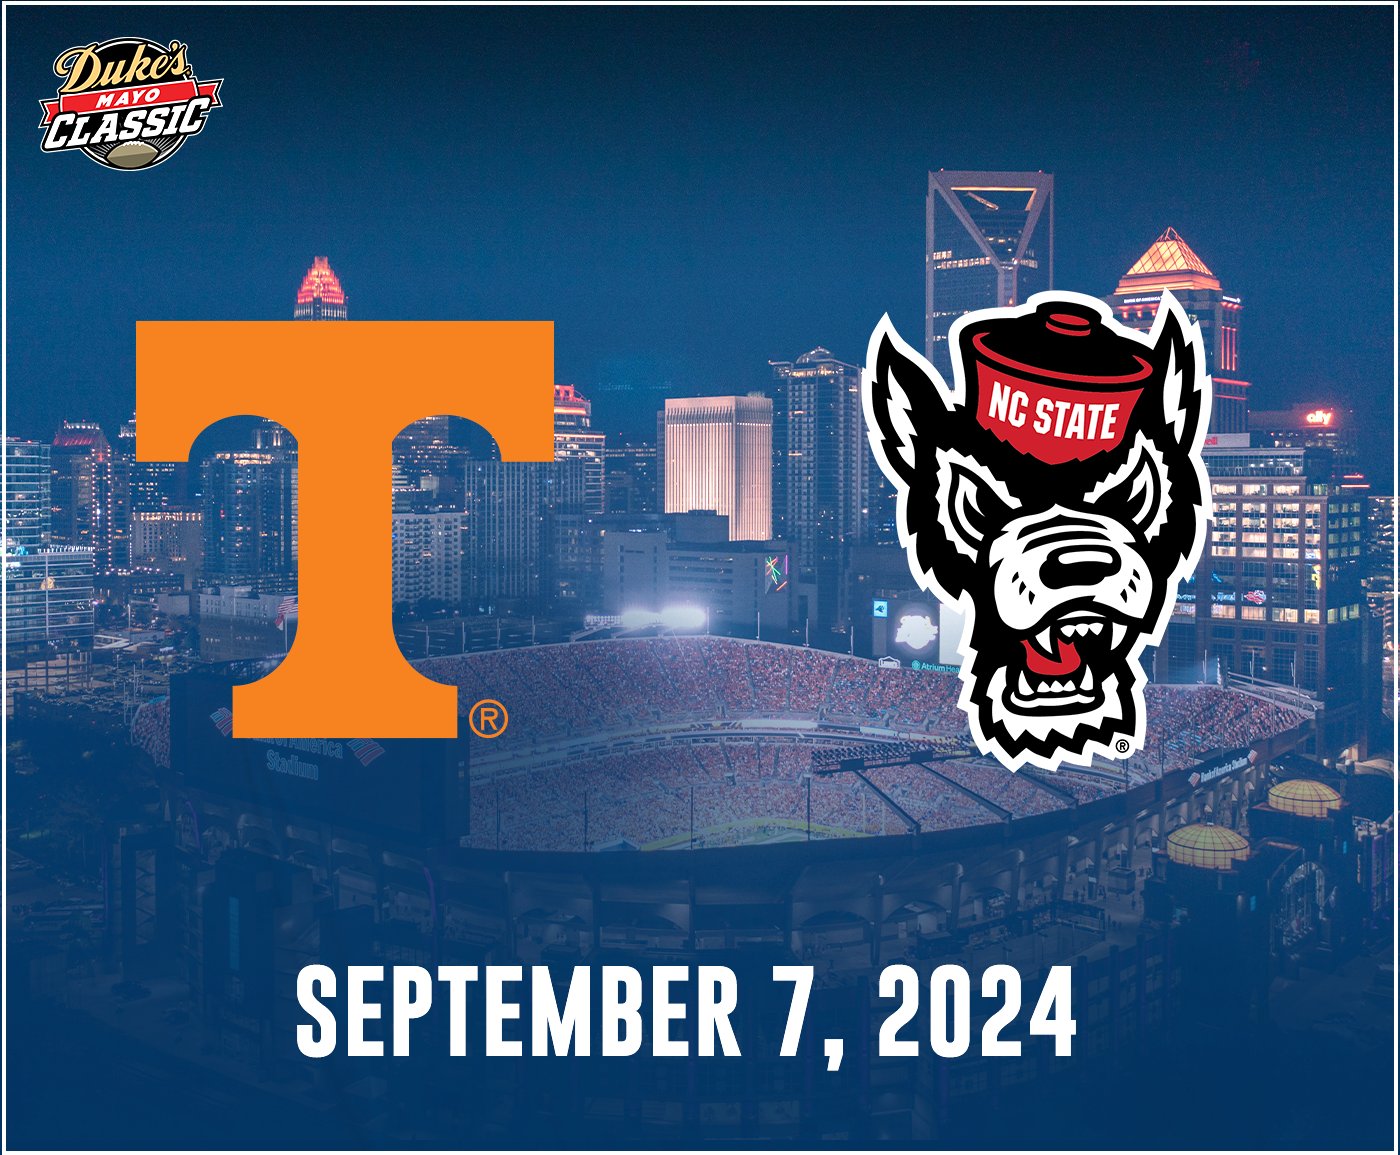 TENNESSEE AND NC STATE TO PLAY IN THE 2024 DUKE’S MAYO CLASSIC Duke's